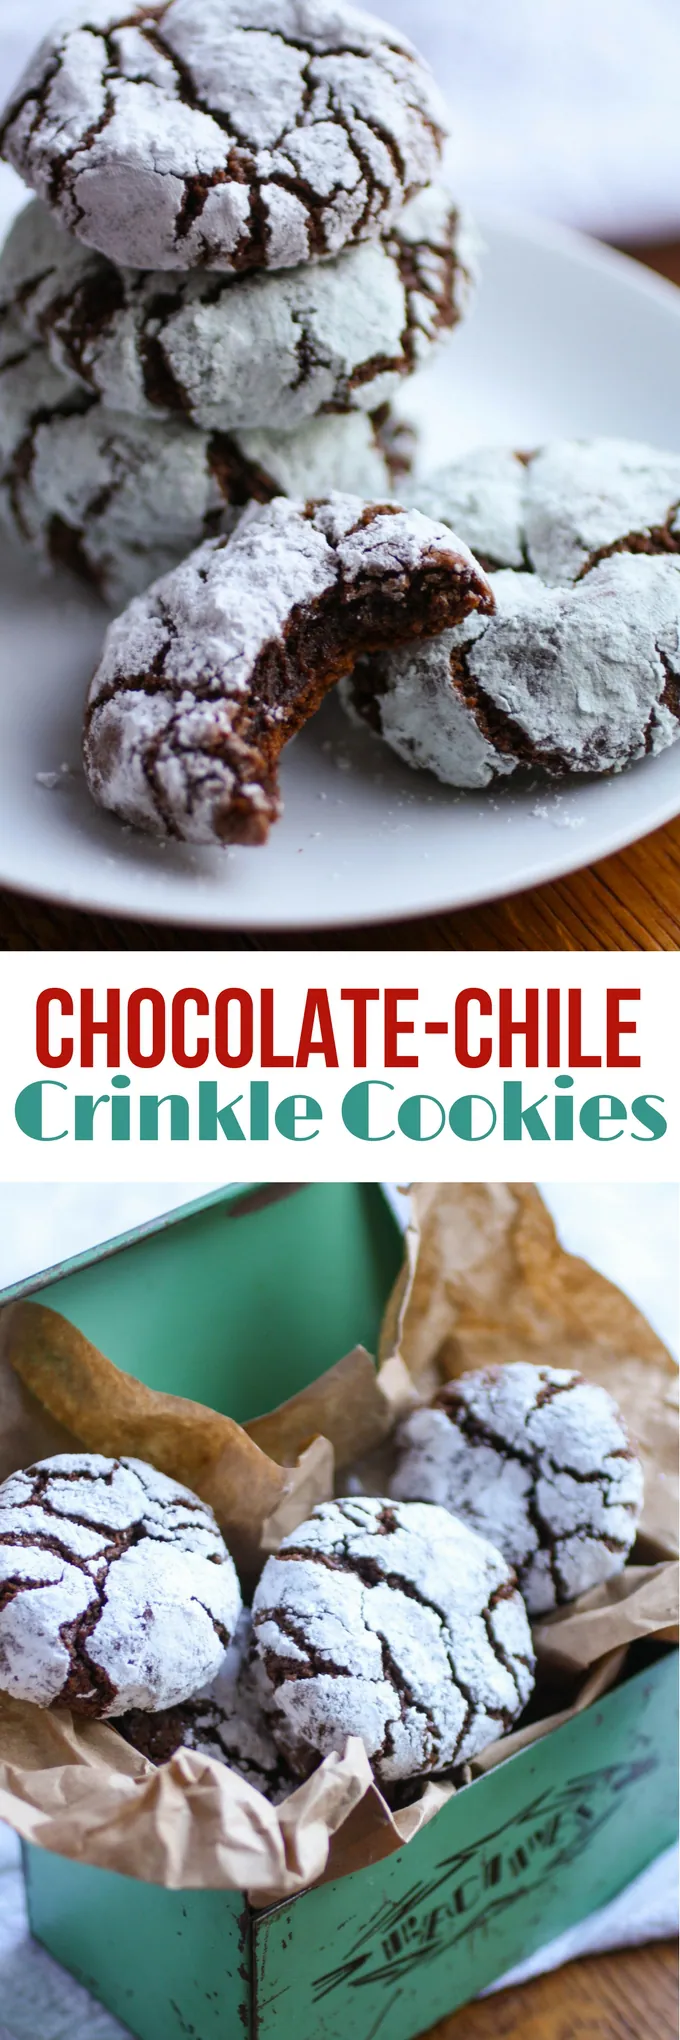 Chocolate-Chili Crinkle Cookies are delightful cookies to serve anytime! You'll love how rich and chocolaty these cookies are! 